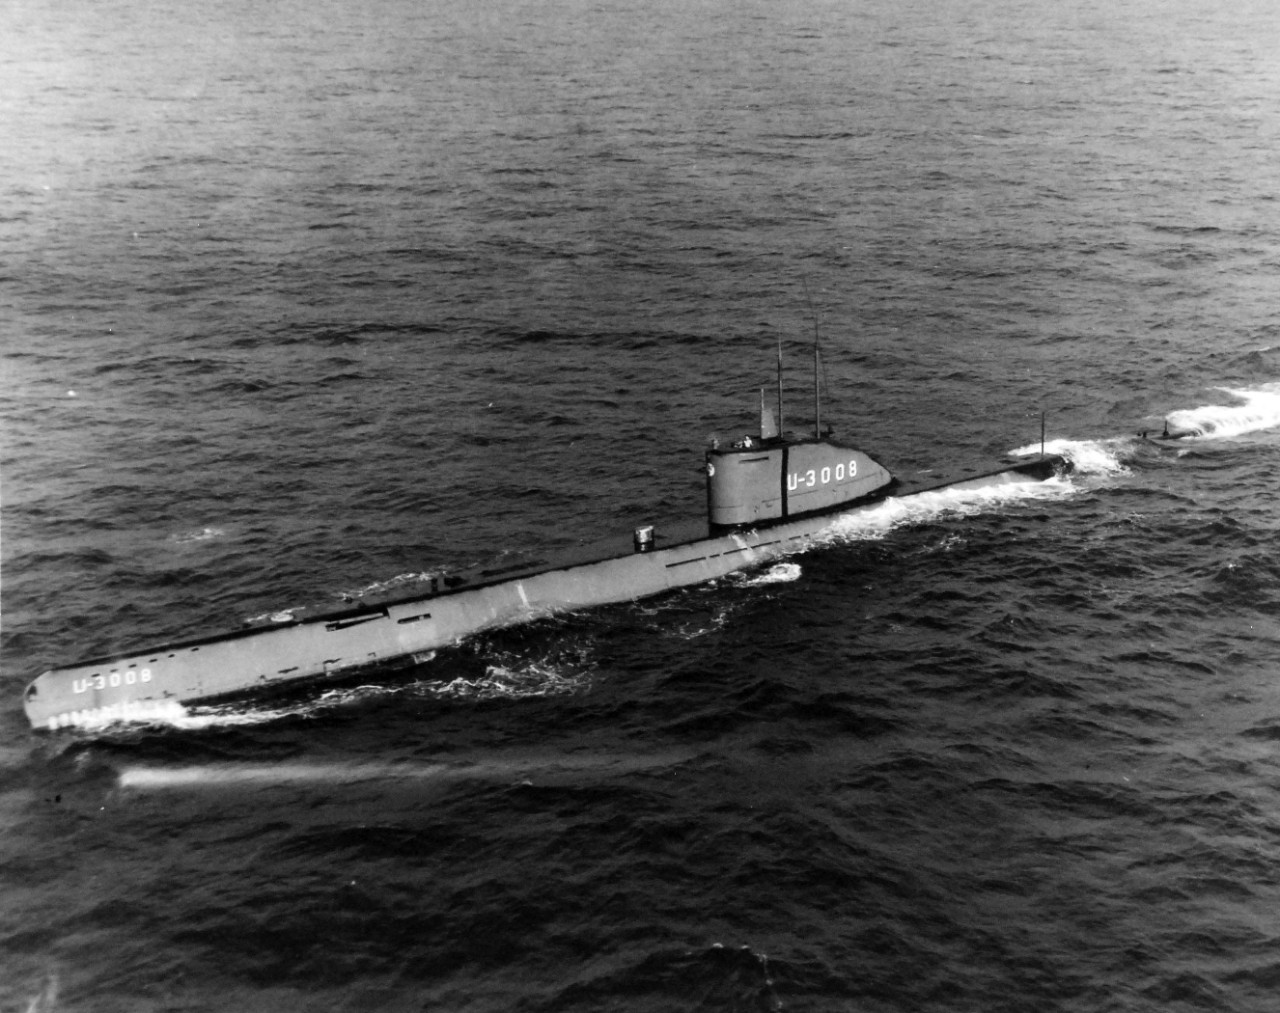 <p>80-G-442933: Surrender of German U-boats, 1945. German submarine, U-3008, at sea. She was renamed USS U-3008 in August 1945. Photographed by aircraft from Naval Air Station, Key West, Florida, April 15, 1948. She was scuttled in 1954 but was raised a year later and sold for scrap. Official U.S. Navy Photograph, now in the collections of the National Archives. (2015/07/08).</p>
